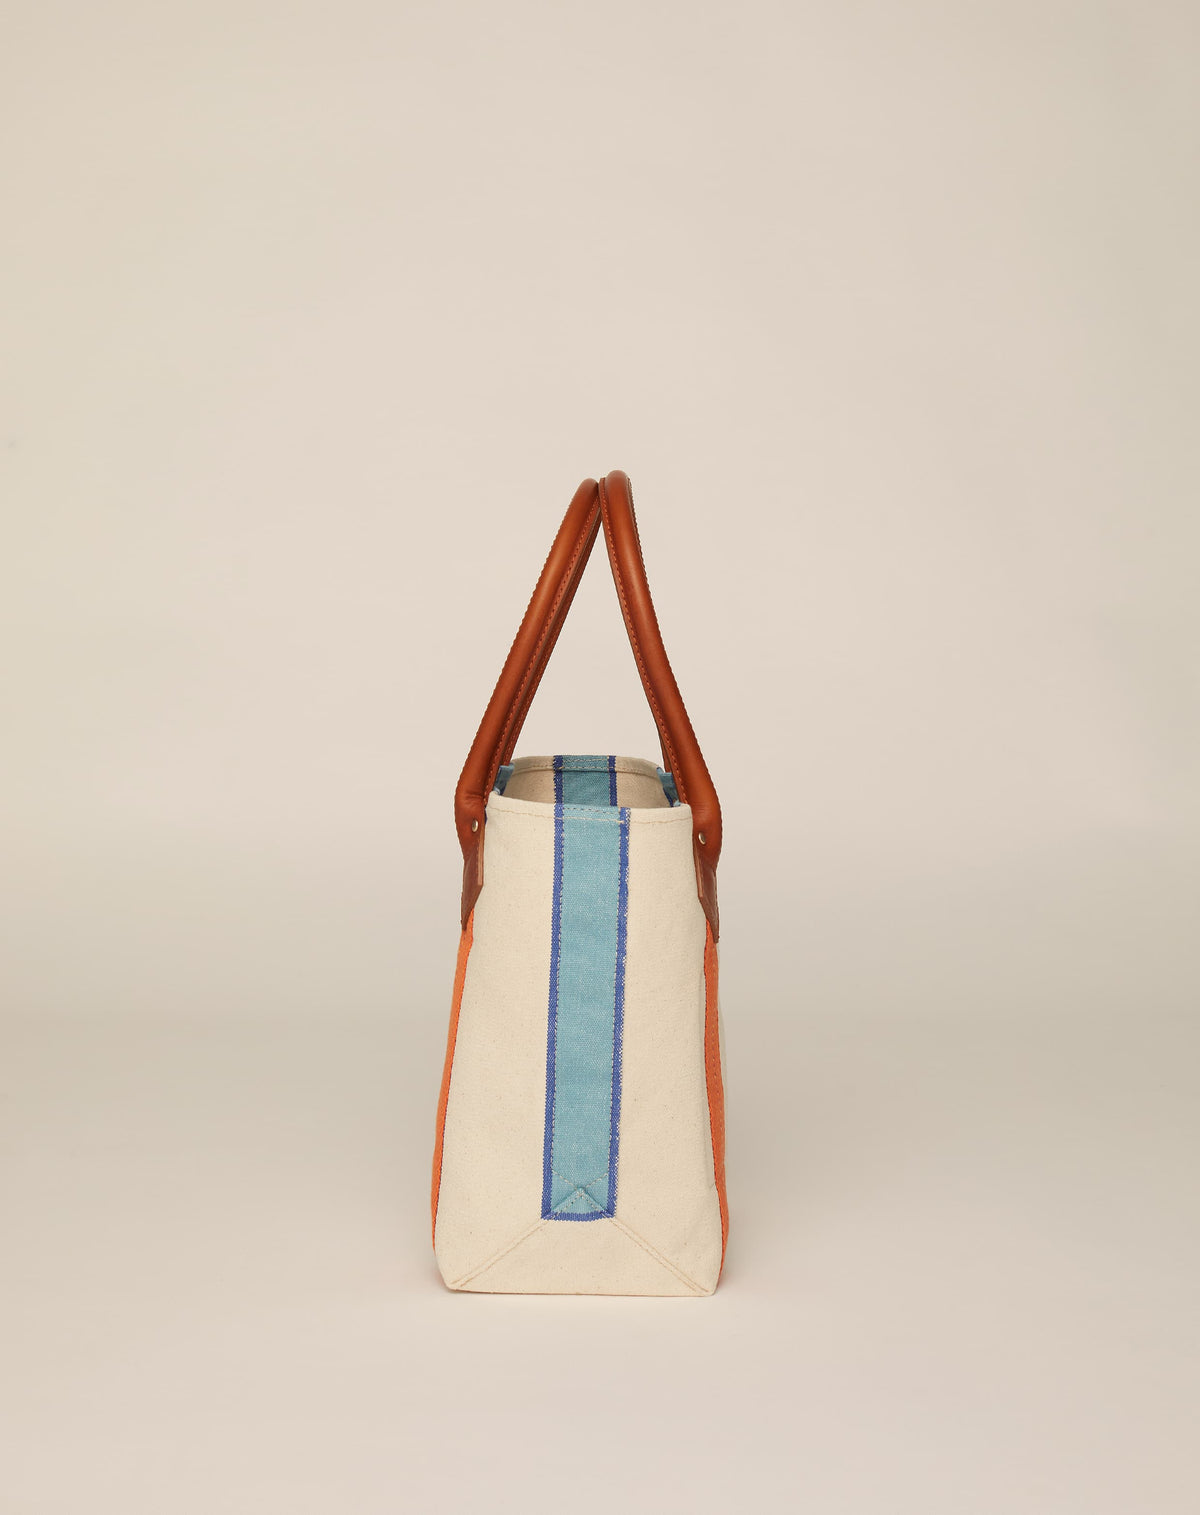 Side image of small classic canvas tote bag in natural ecru colour with tan leather handles and contrasting stripes.